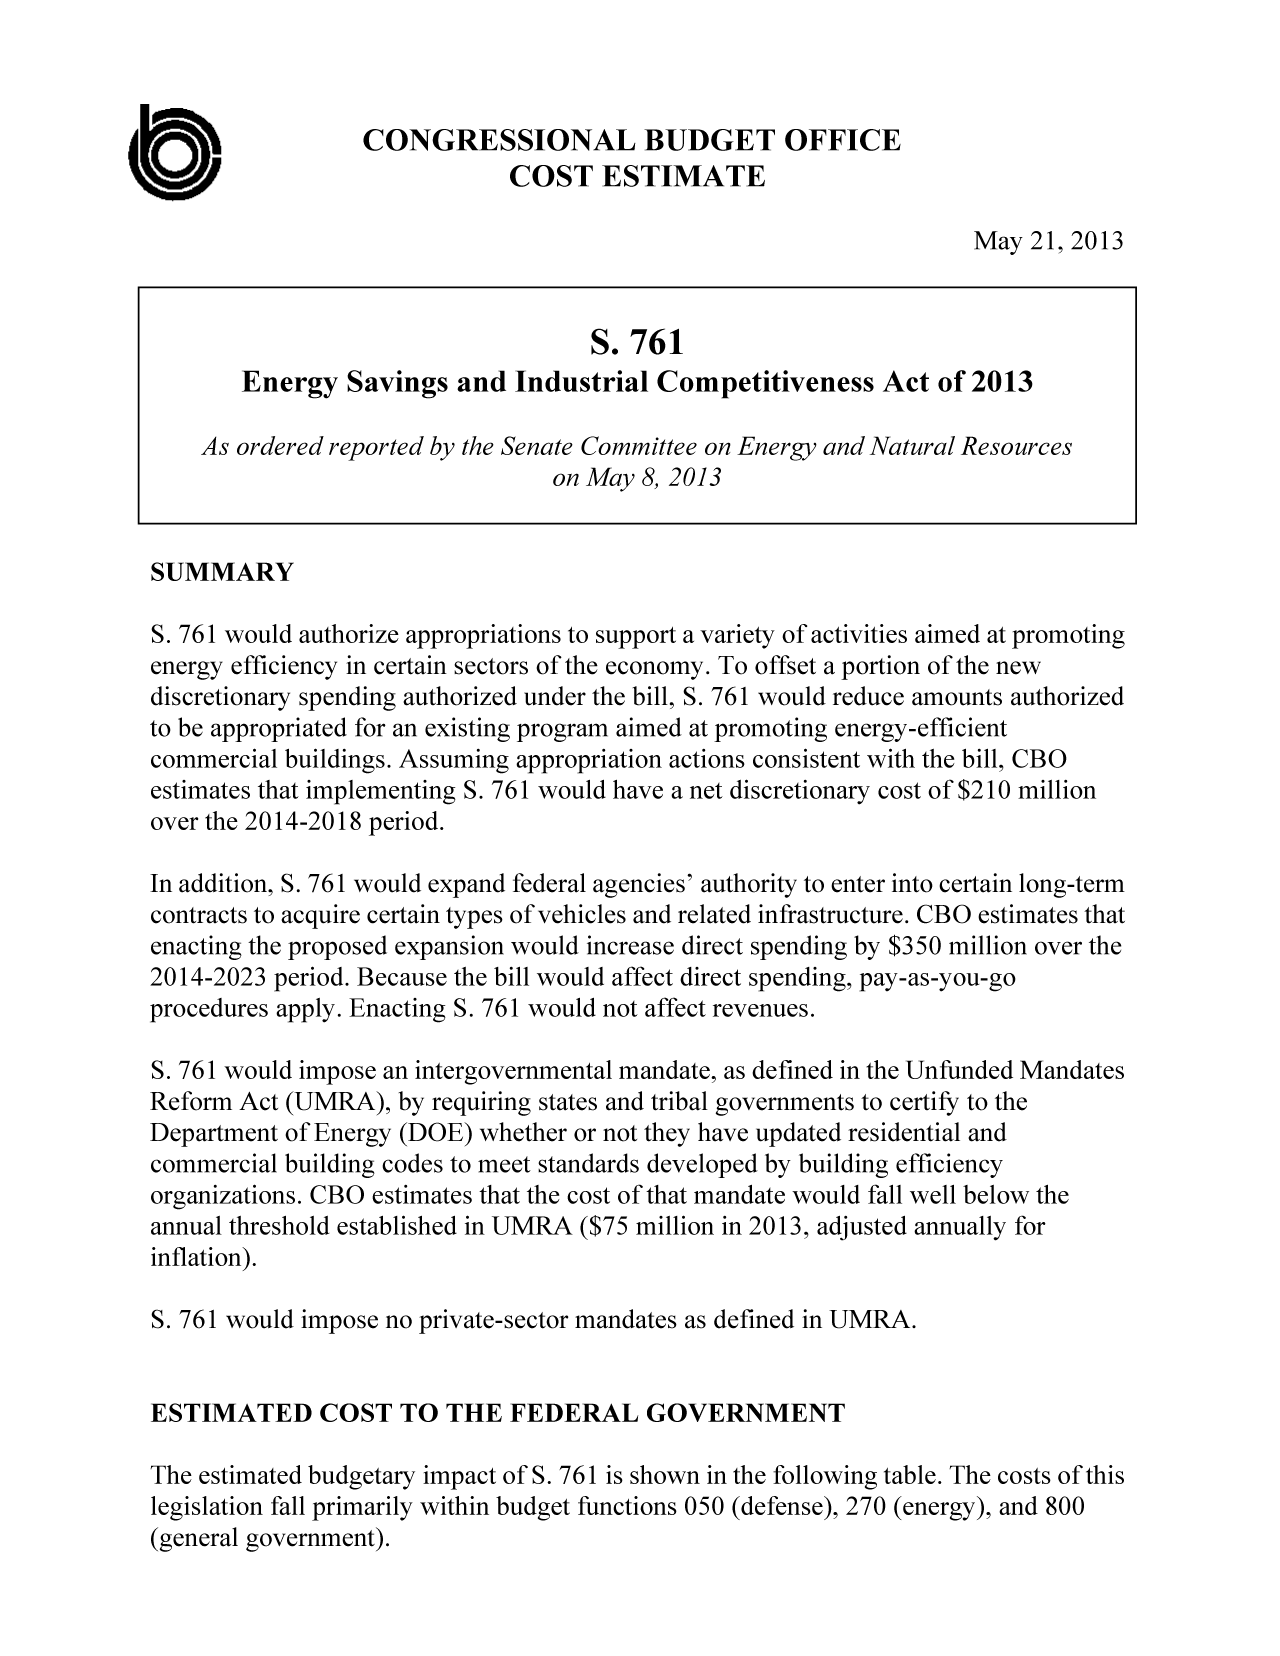 handle is hein.congrec/cbo11137 and id is 1 raw text is: CONGRESSIONAL BUDGET OFFICE
0o                            COST ESTIMATE
May 21, 2013
S. 761
Energy Savings and Industrial Competitiveness Act of 2013
As ordered reported by the Senate Committee on Energy and Natural Resources
on May 8, 2013
SUMMARY
S. 761 would authorize appropriations to support a variety of activities aimed at promoting
energy efficiency in certain sectors of the economy. To offset a portion of the new
discretionary spending authorized under the bill, S. 761 would reduce amounts authorized
to be appropriated for an existing program aimed at promoting energy-efficient
commercial buildings. Assuming appropriation actions consistent with the bill, CBO
estimates that implementing S. 761 would have a net discretionary cost of $210 million
over the 2014-2018 period.
In addition, S. 761 would expand federal agencies' authority to enter into certain long-term
contracts to acquire certain types of vehicles and related infrastructure. CBO estimates that
enacting the proposed expansion would increase direct spending by $350 million over the
2014-2023 period. Because the bill would affect direct spending, pay-as-you-go
procedures apply. Enacting S. 761 would not affect revenues.
S. 761 would impose an intergovernmental mandate, as defined in the Unfunded Mandates
Reform Act (UMRA), by requiring states and tribal governments to certify to the
Department of Energy (DOE) whether or not they have updated residential and
commercial building codes to meet standards developed by building efficiency
organizations. CBO estimates that the cost of that mandate would fall well below the
annual threshold established in UMRA ($75 million in 2013, adjusted annually for
inflation).
S. 761 would impose no private-sector mandates as defined in UMRA.
ESTIMATED COST TO THE FEDERAL GOVERNMENT
The estimated budgetary impact of S. 761 is shown in the following table. The costs of this

legislation fall primarily within budget functions 050 (defense), 270 (energy), and 800
(general government).


